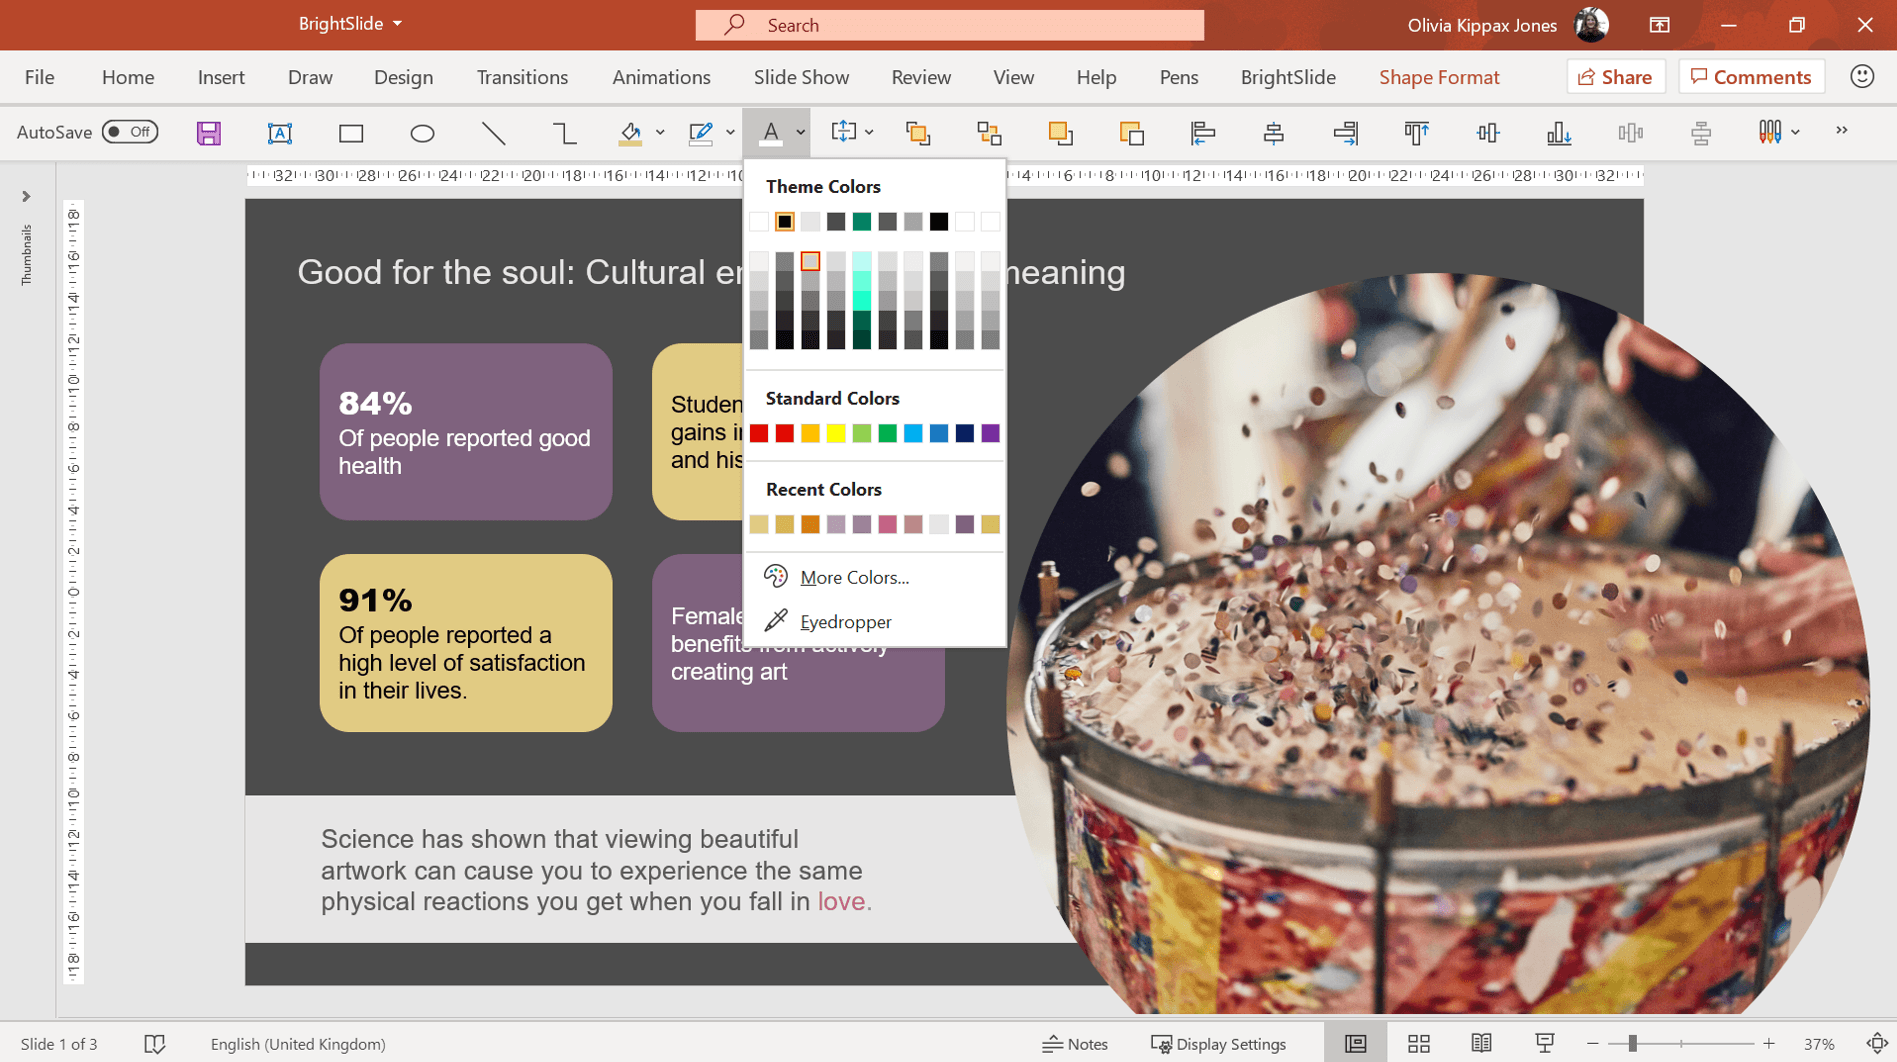 powerpoint presentation color blindness